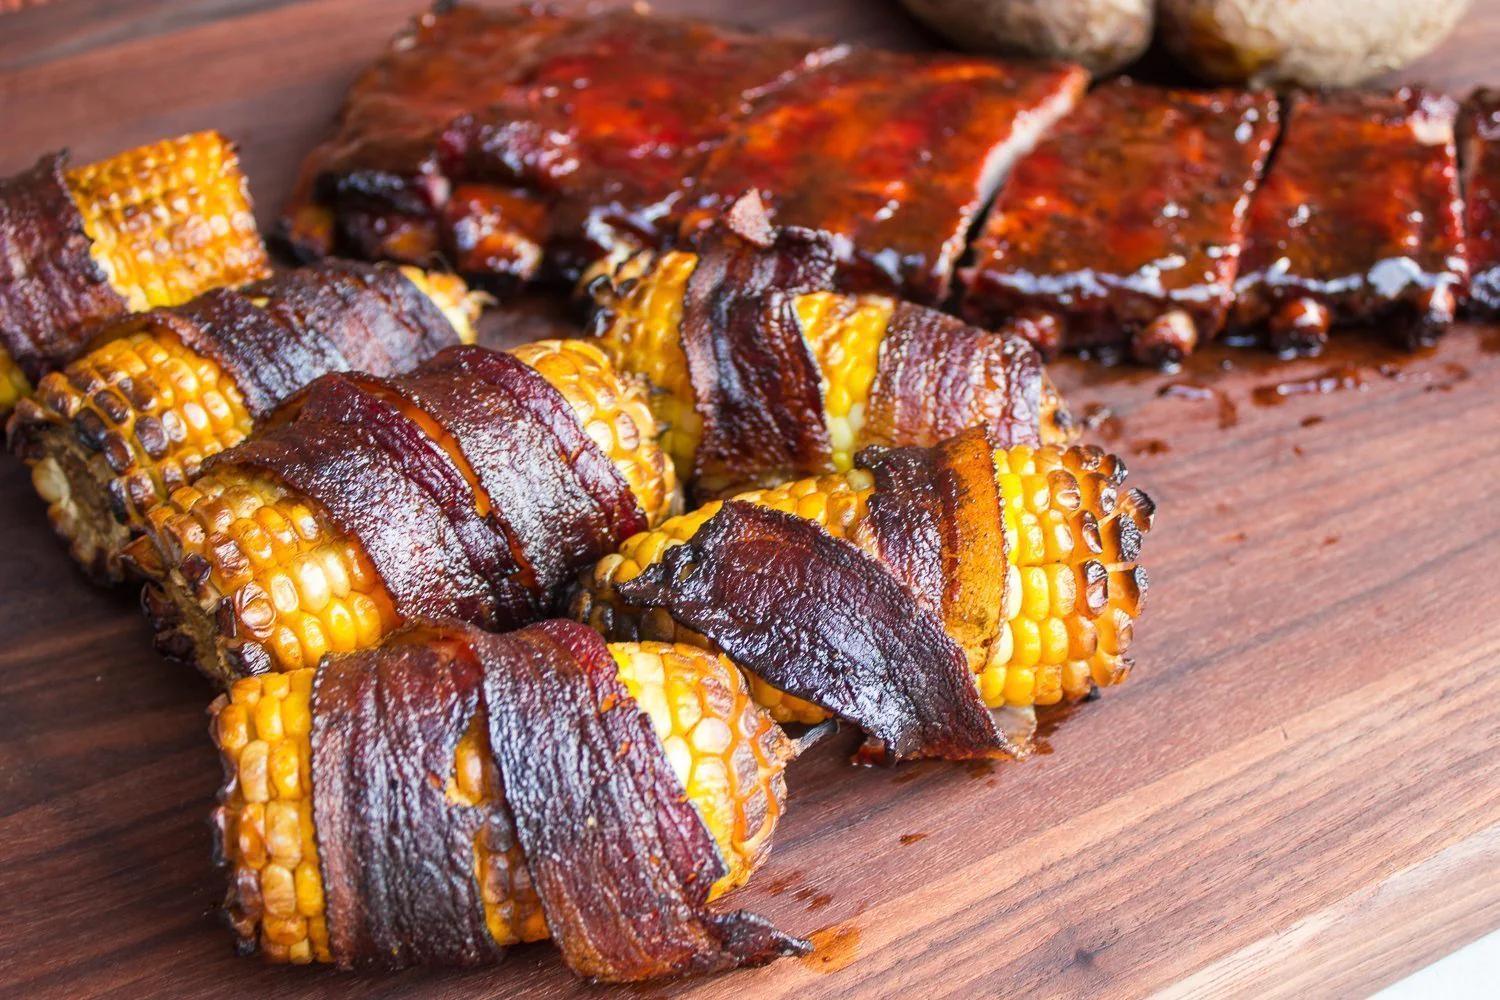 cob smoked - Are corn cobs good for smoking meat